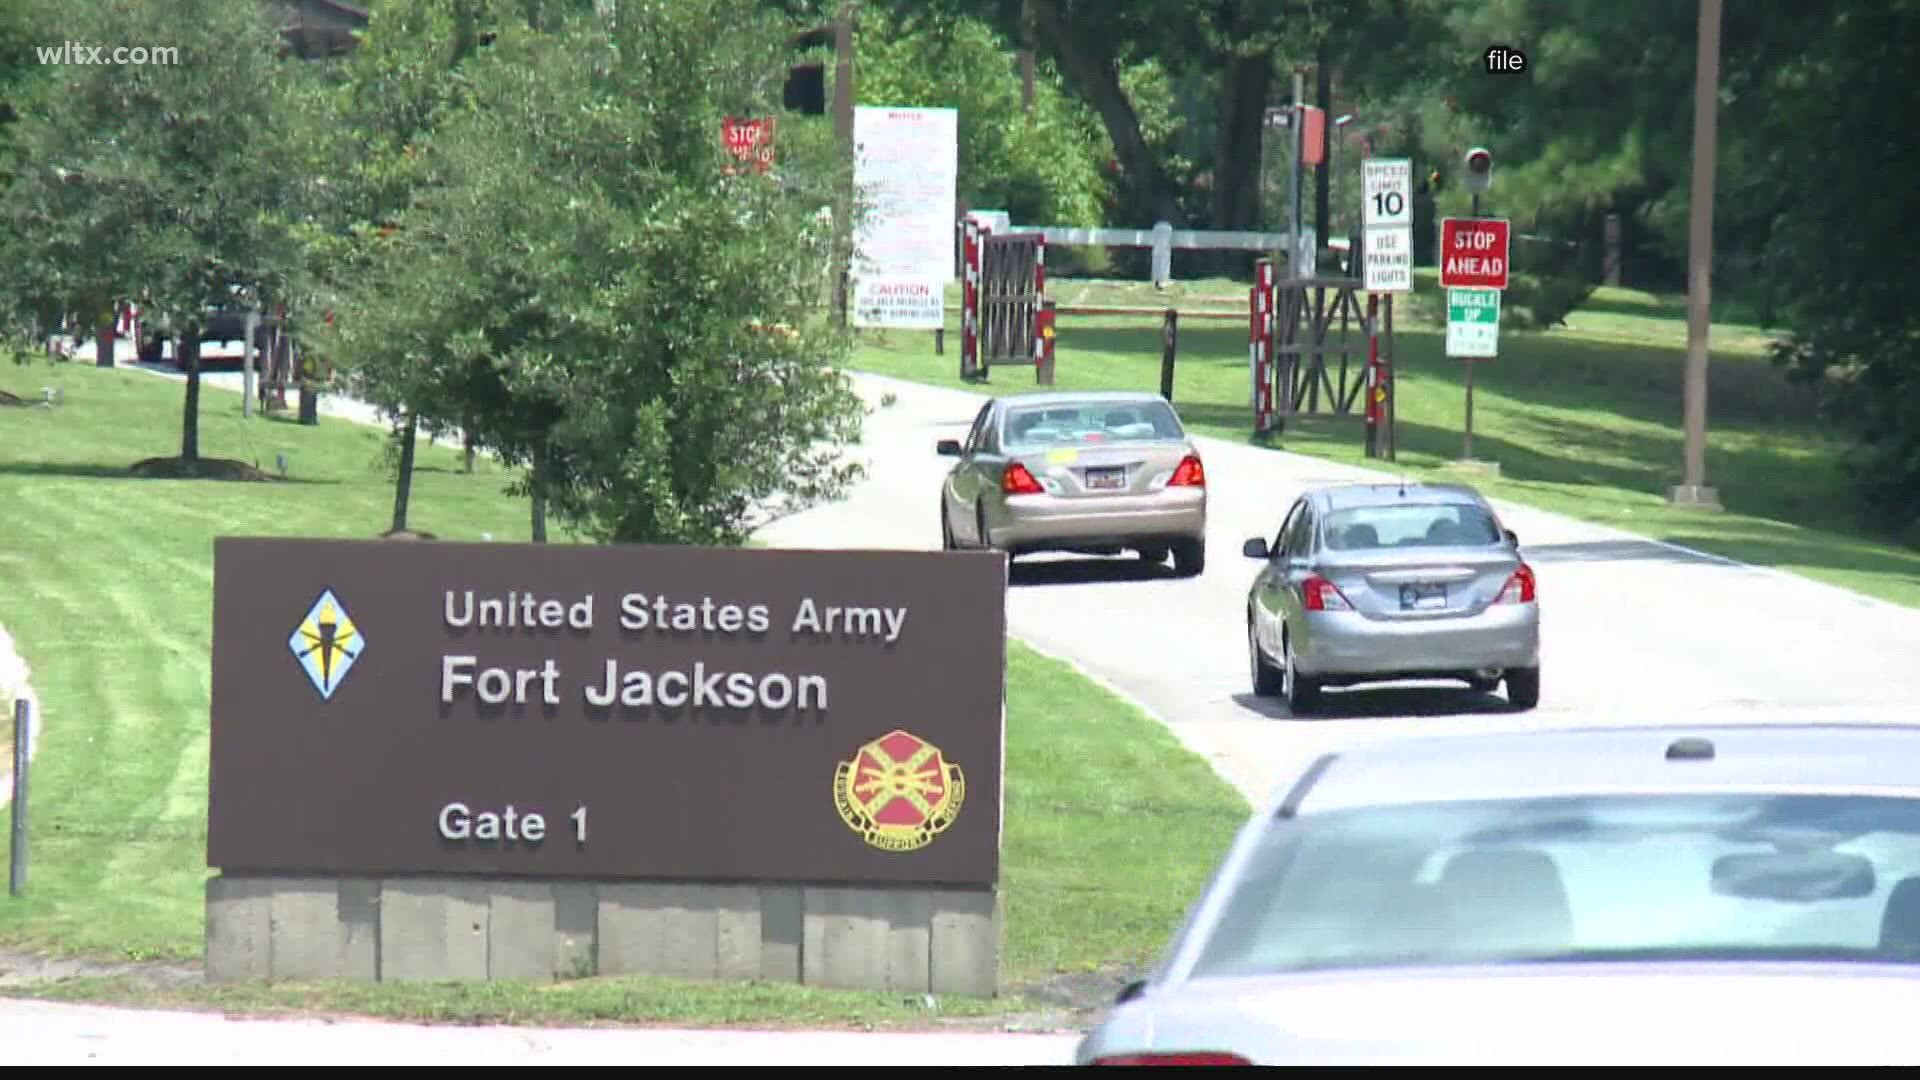 Fort Jackson's Morale, Welfare and Recreation Center is holding a job fair for military and civilians in the community